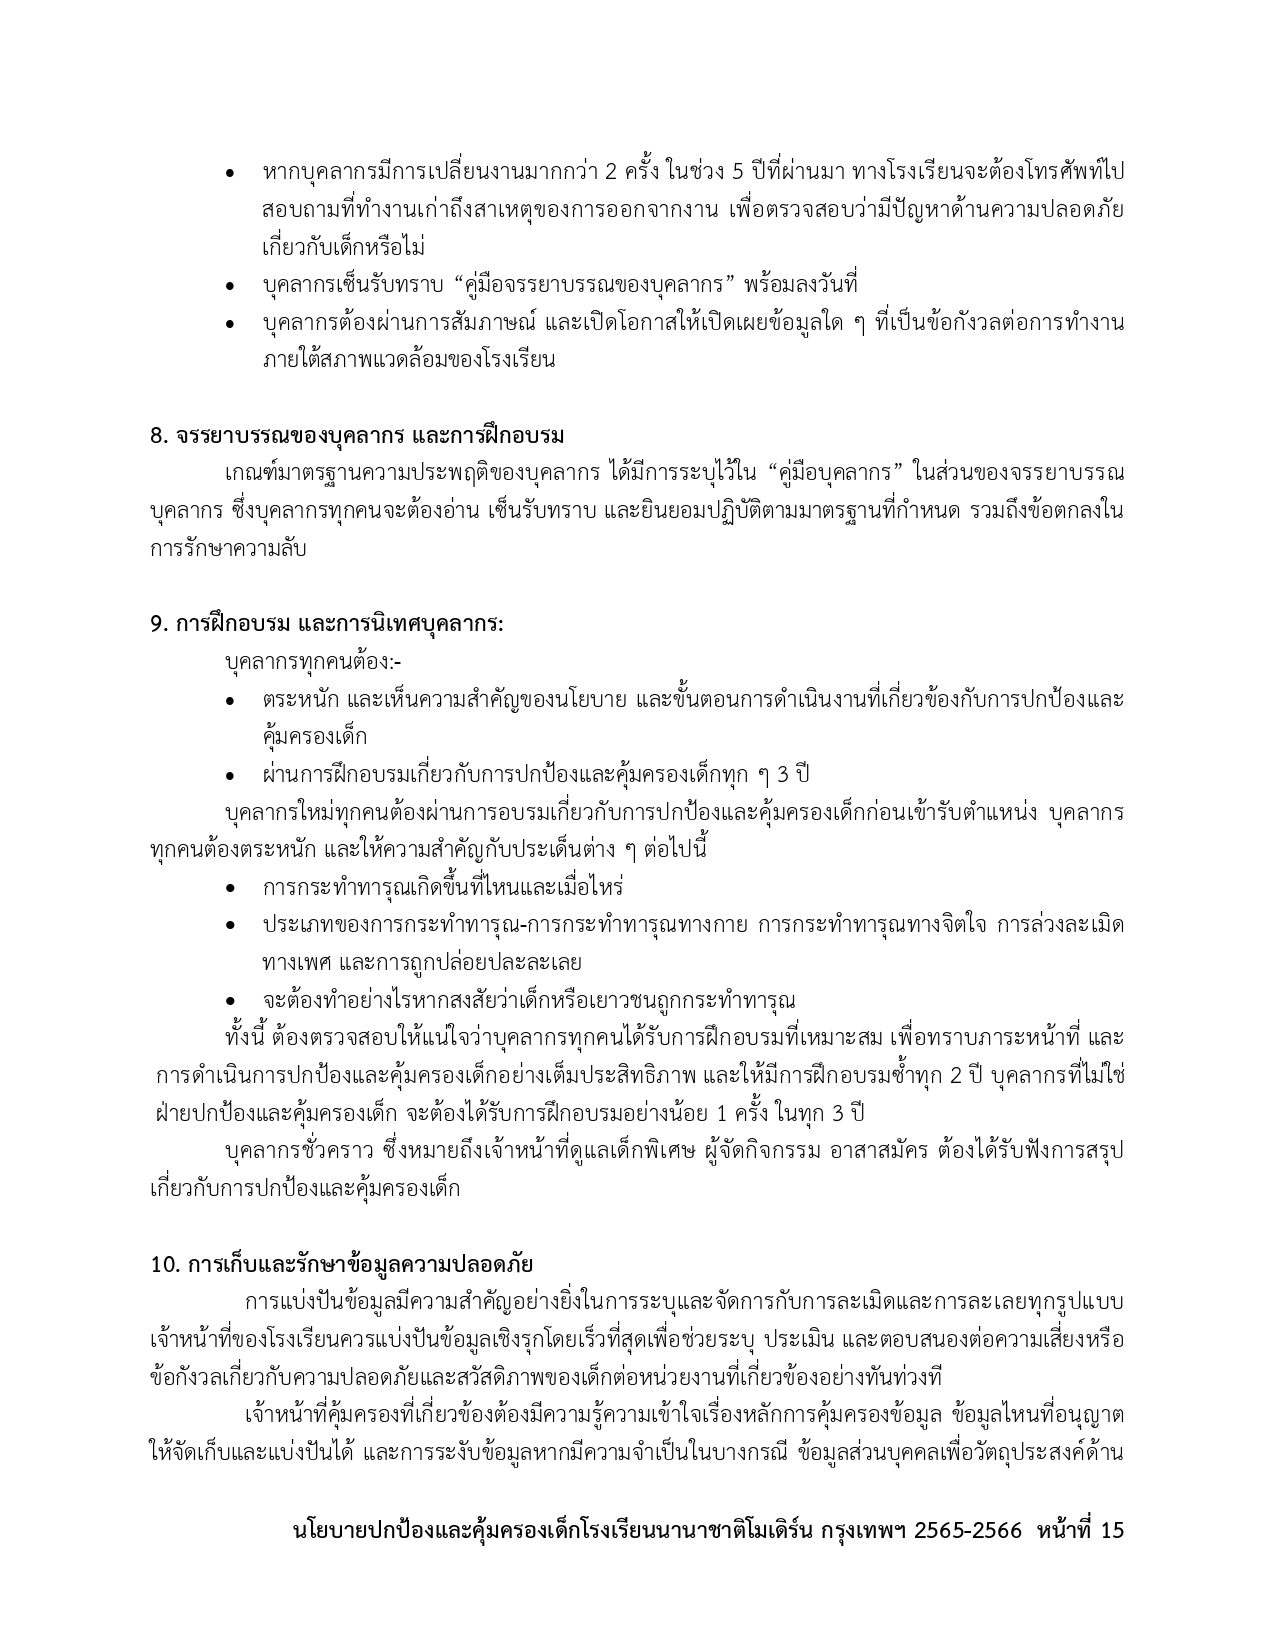 Child Protection Policy Thai Version page 0015